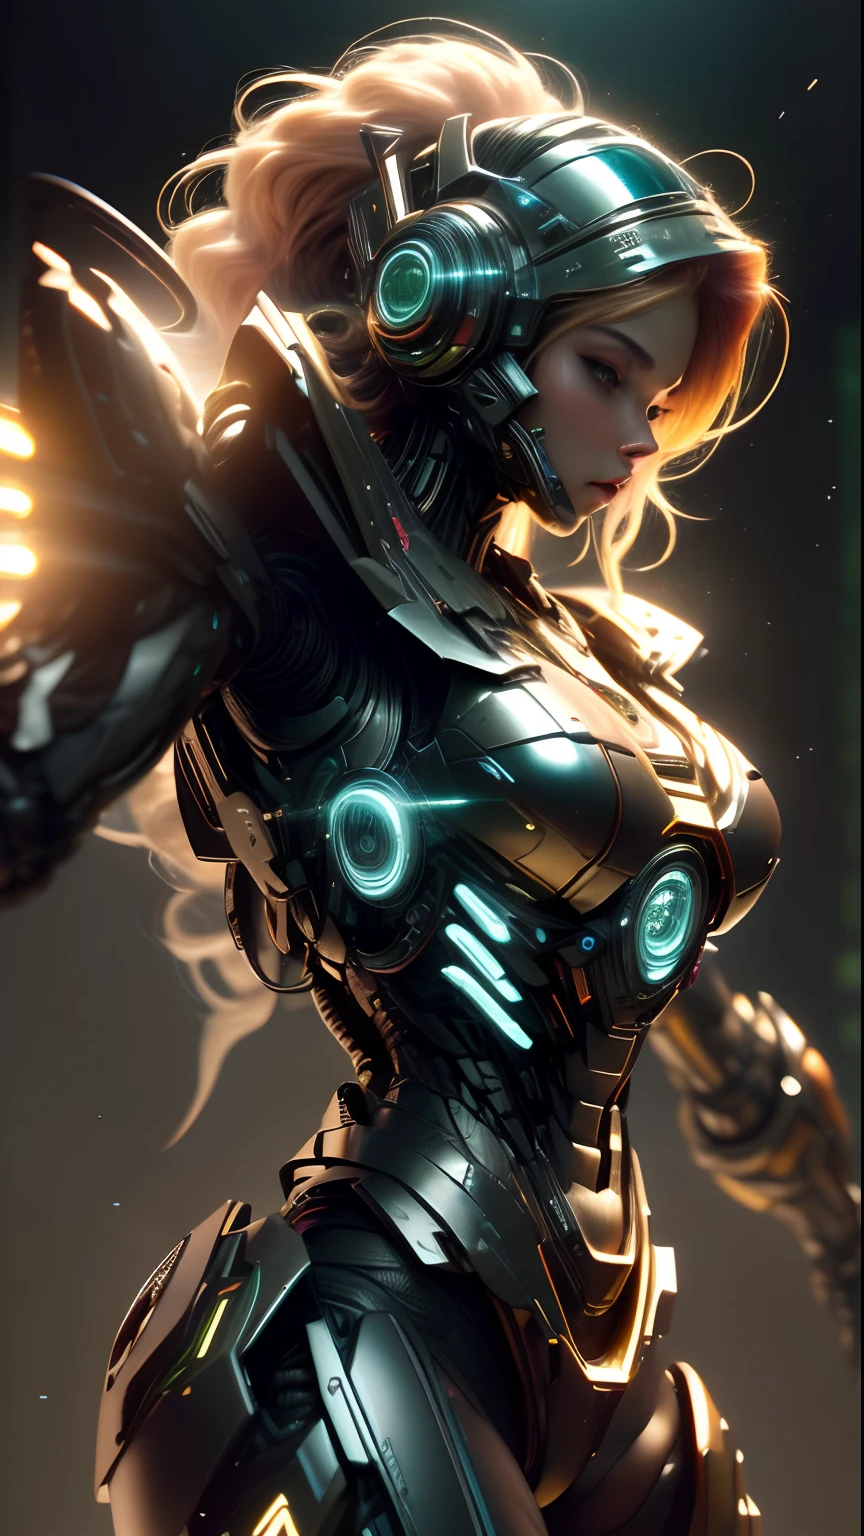 ((Best Quality)), ((Masterpiece)), (detailed: 1.4), ....3D, A photo of a beautiful woman in thick neon and protective armor with generative helmet ai cyberpunk voluminous hair, light particles, Pure energy, chaos, antitech, HDR (High Dymanic Range), ray tracing ,NVIDIA RTX, Super-Resolution, Unreal 5, subsurface dispersion, Textured PBR, post-processing, Anisotropic filtering, depth of field, Maximum clarity and sharpness, Multilayer textures, Albedo and specular maps, surface shading, Accurate simulation of light-material interaction,perfect proportions,Octane representation,two tone lighting,wide opening,Low ISO,white balance,rule of thirds,RAW 8K